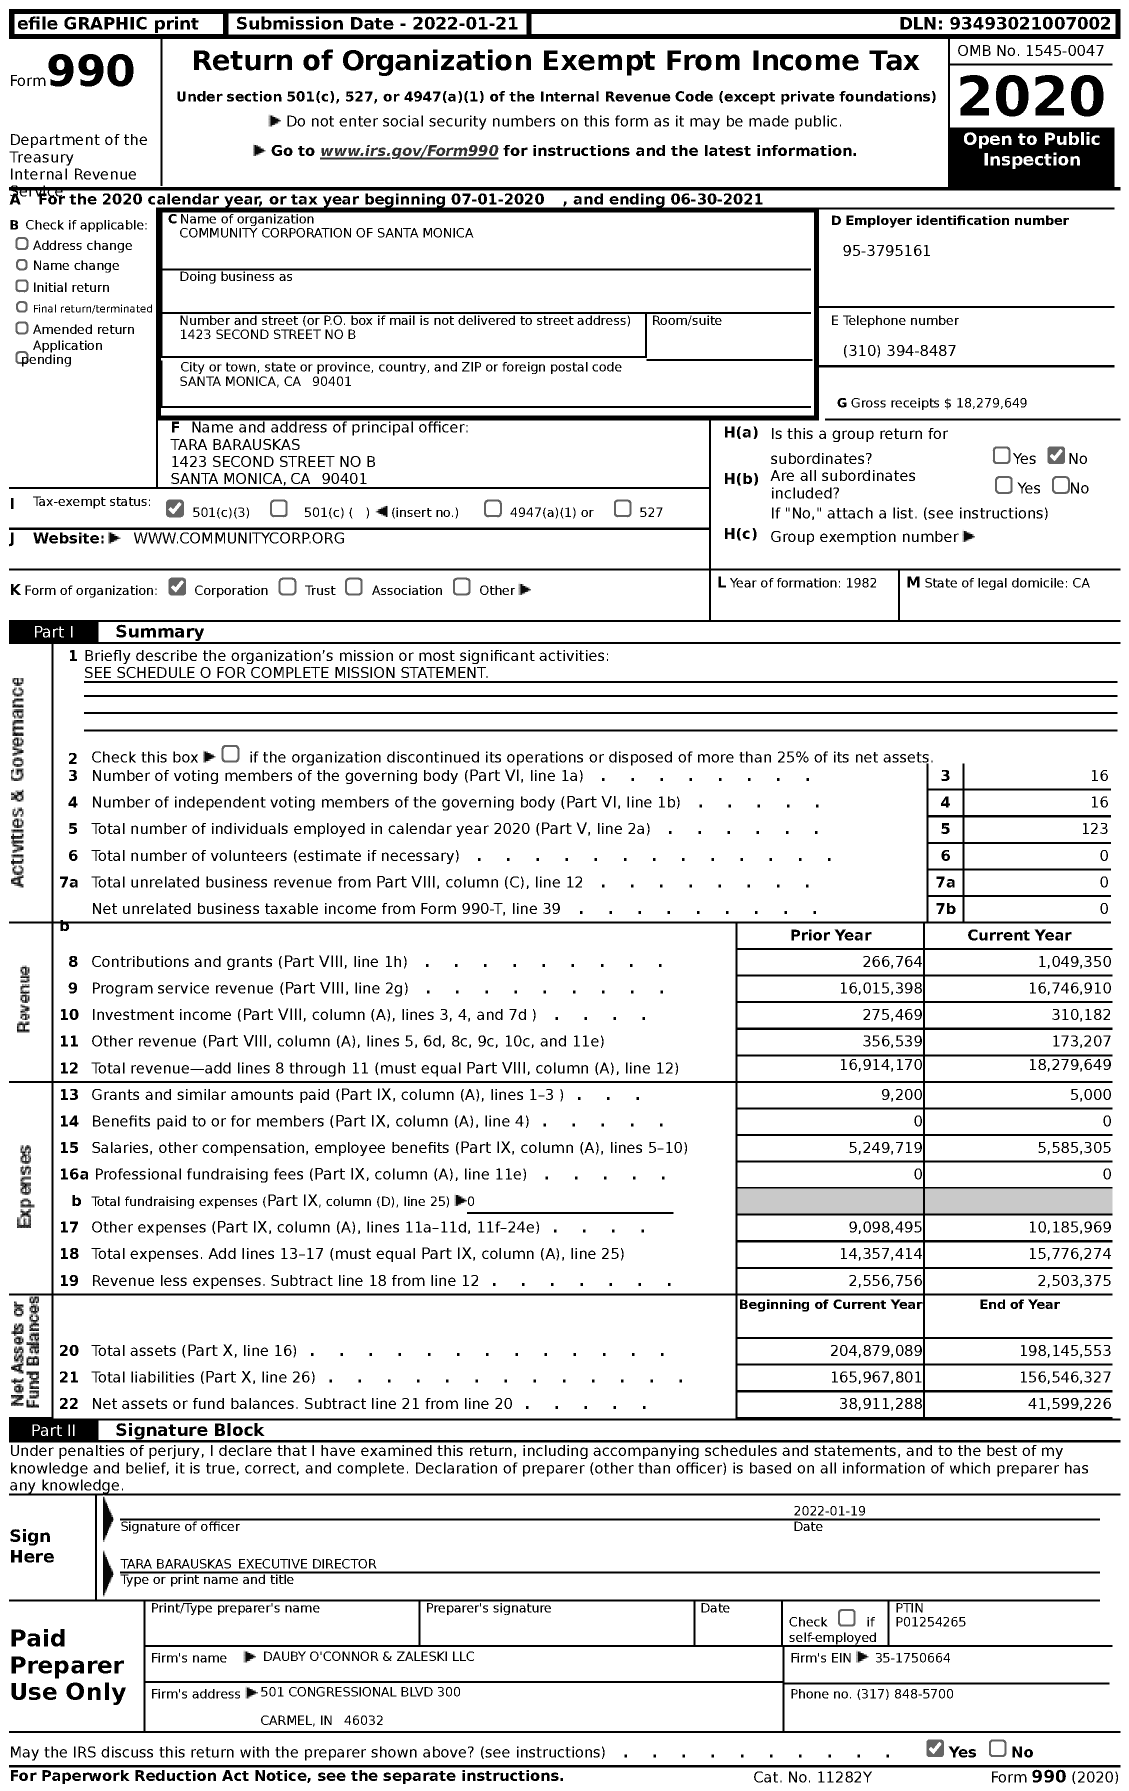 Image of first page of 2020 Form 990 for Community Corporation of Santa Monica